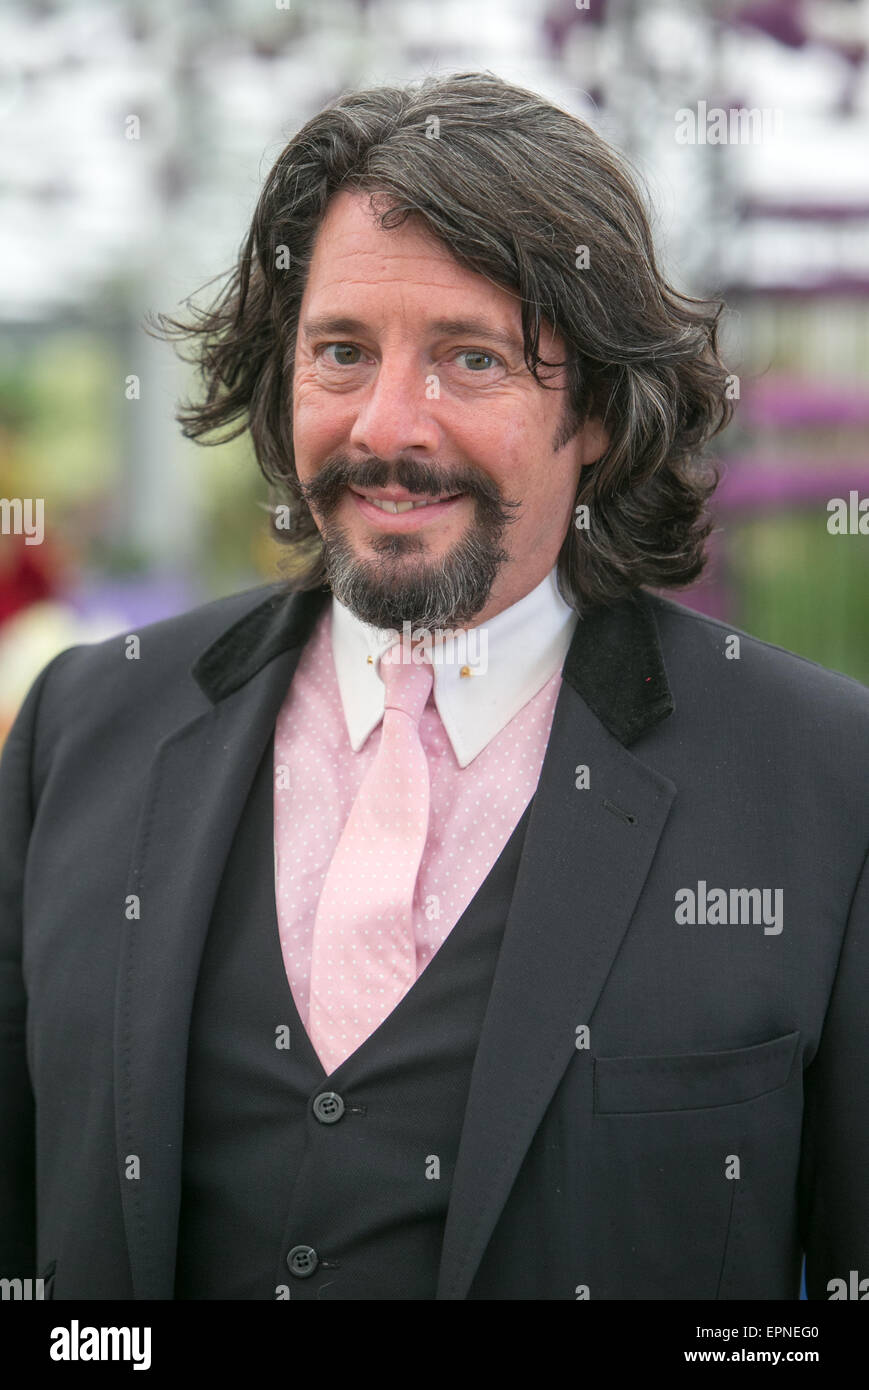 LAURENCE LLEWELYN BOWEN at the RHS Chelsea flower show 2015 Stock Photo